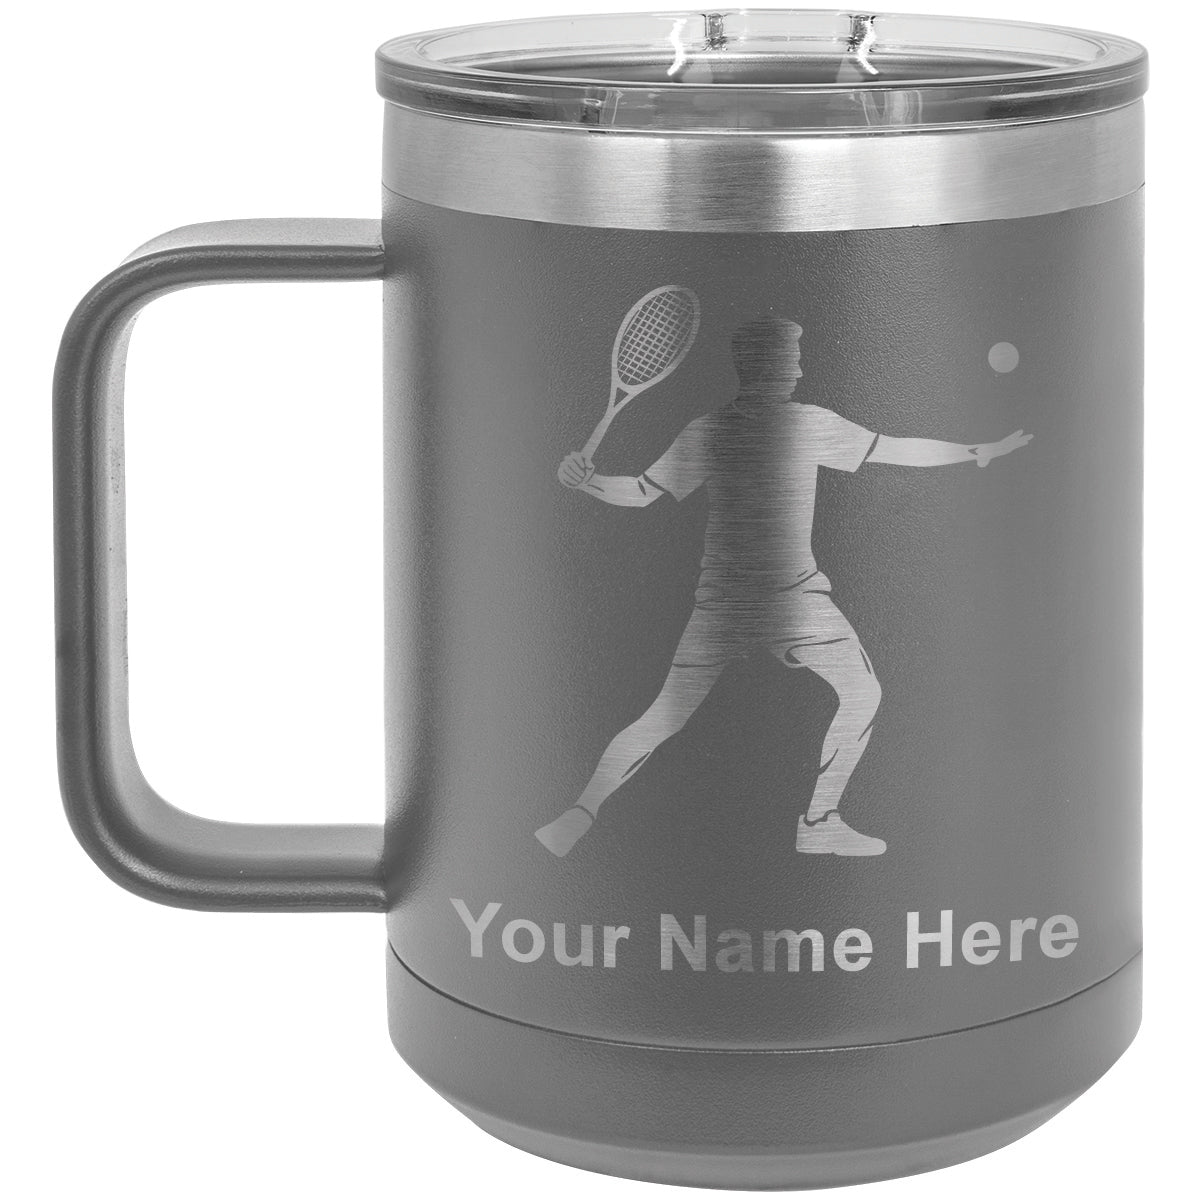 15oz Vacuum Insulated Coffee Mug, Tennis Player Man, Personalized Engraving Included